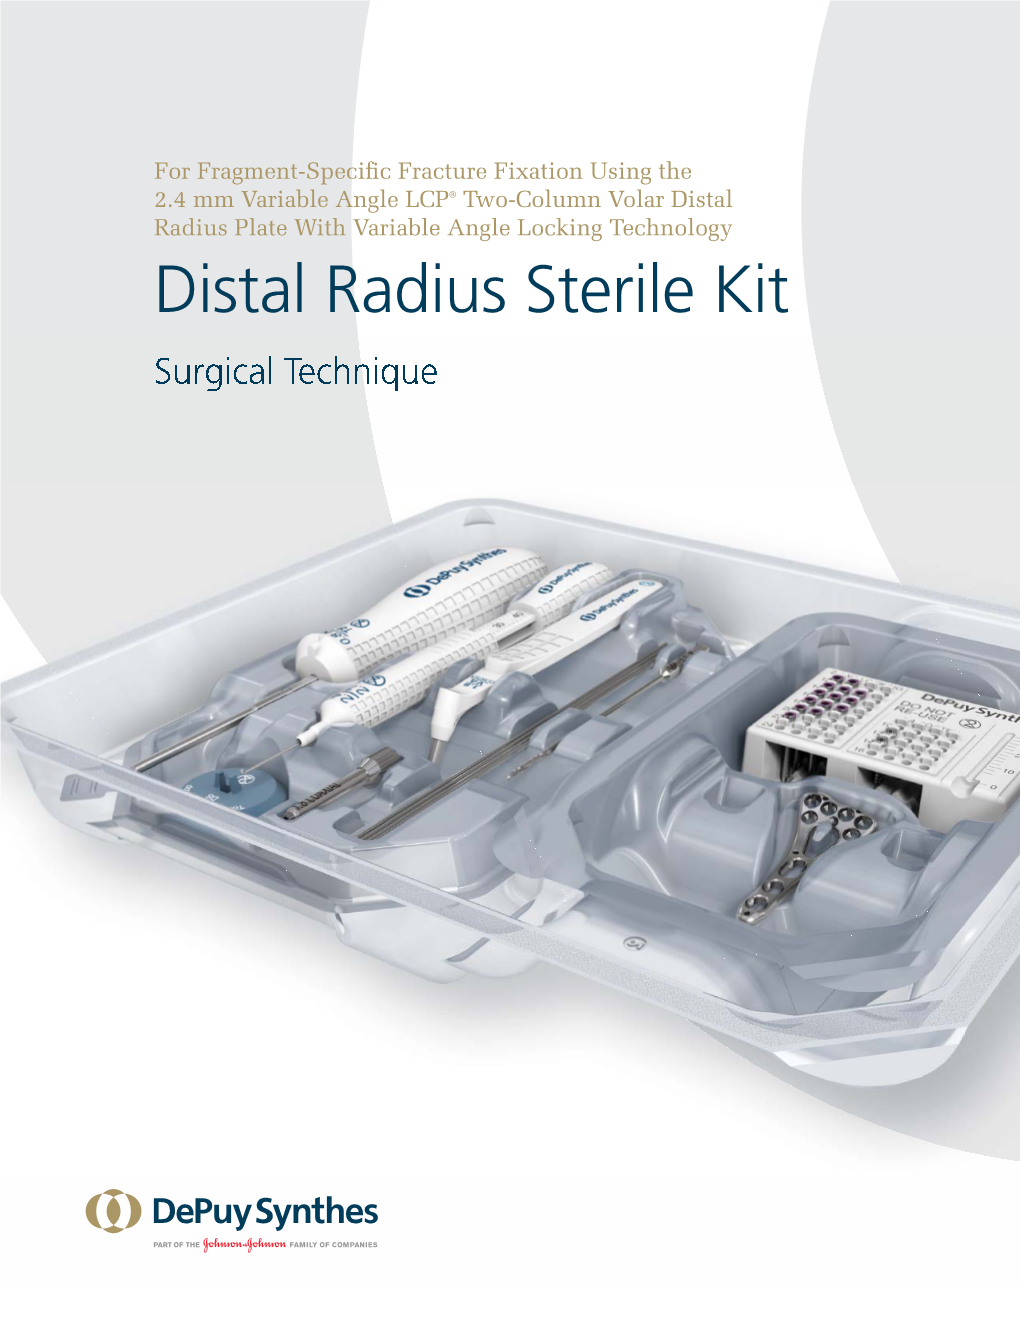 Distal Radius Sterile Kit Surgical Technique Table of Contents